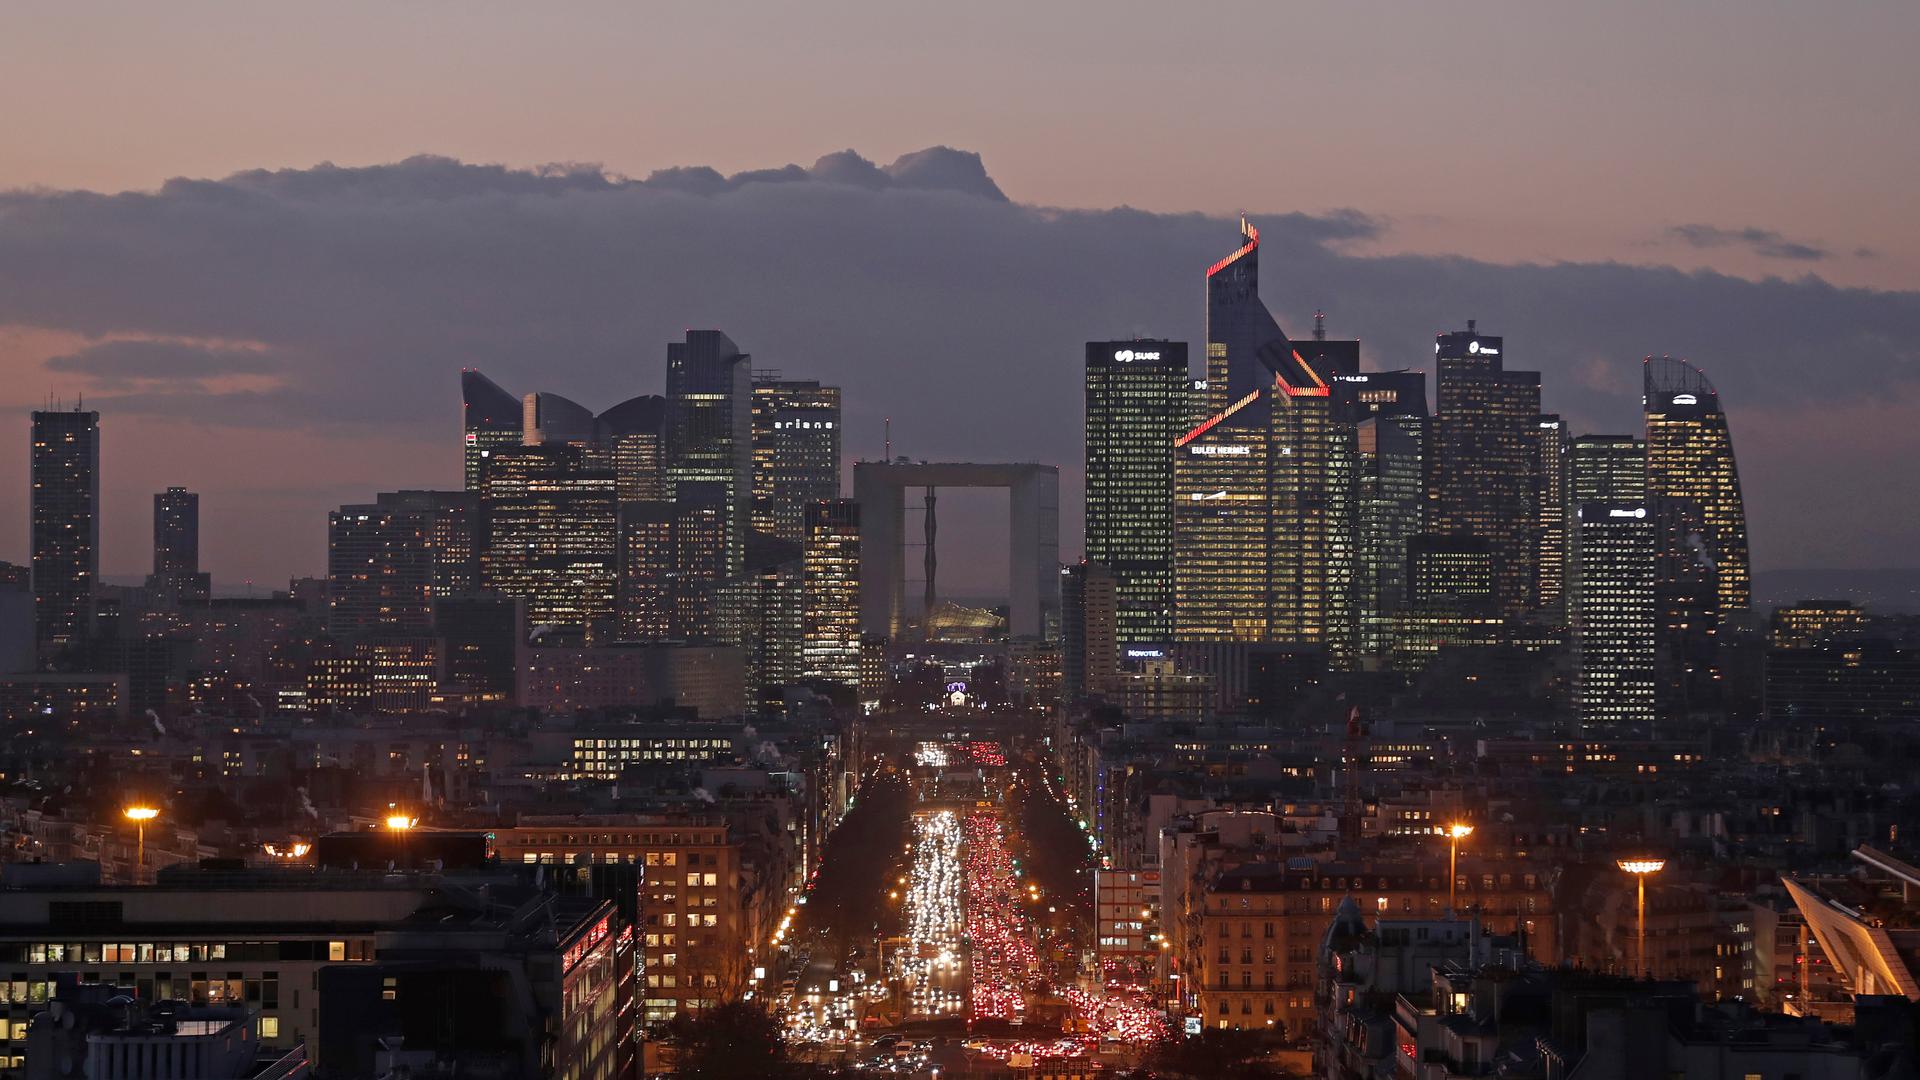 The financial district of Paris, La Defense, at dusk on January 5th 2017